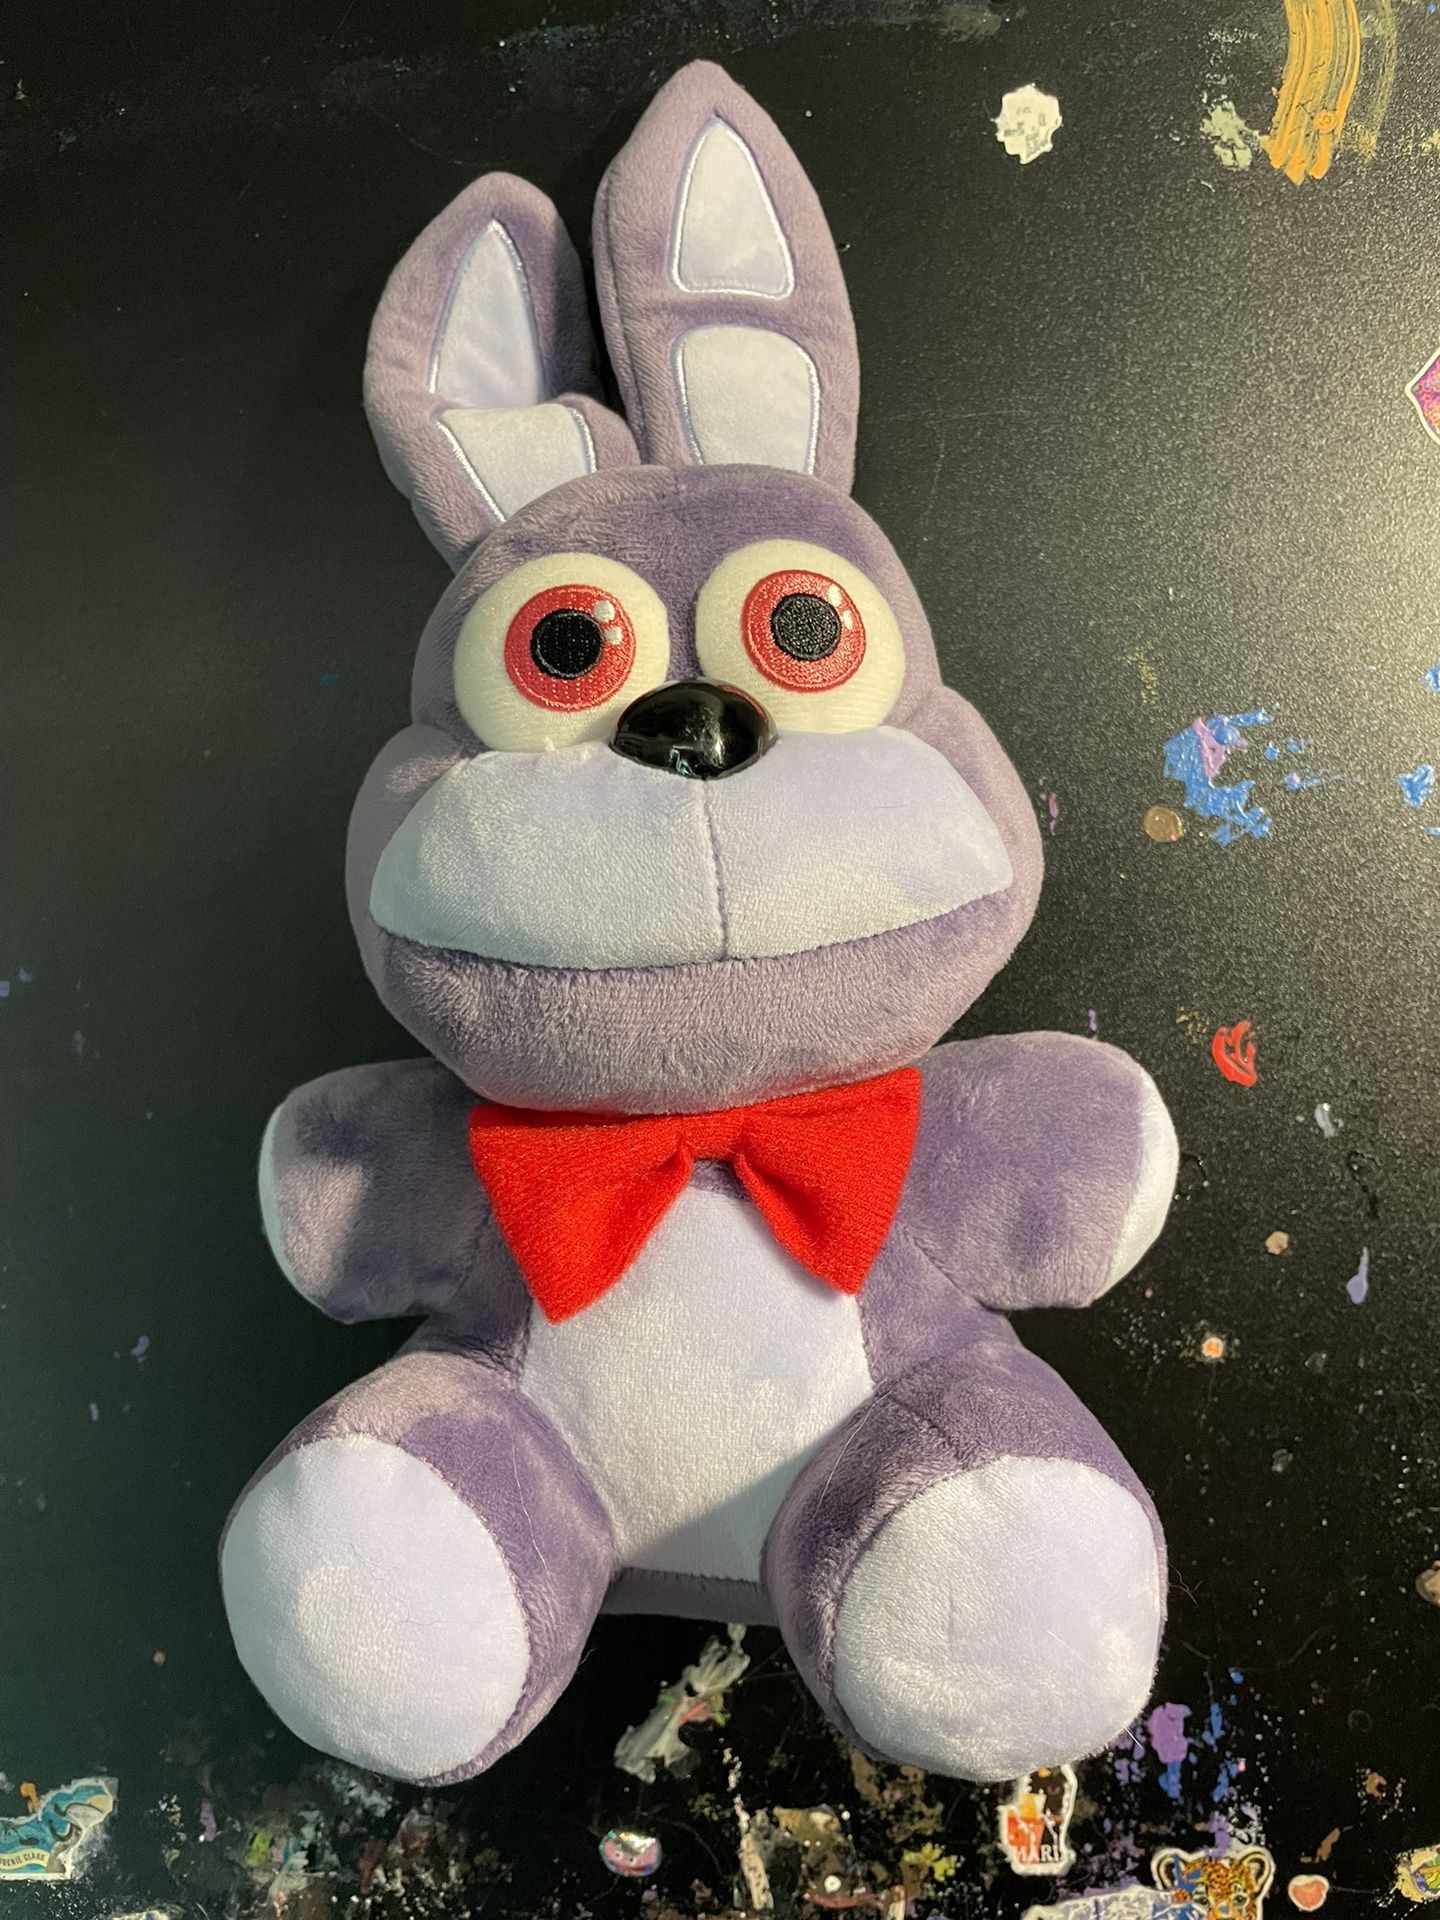 Official Sanshee Five Nights at Freddys Bonnie Plushie